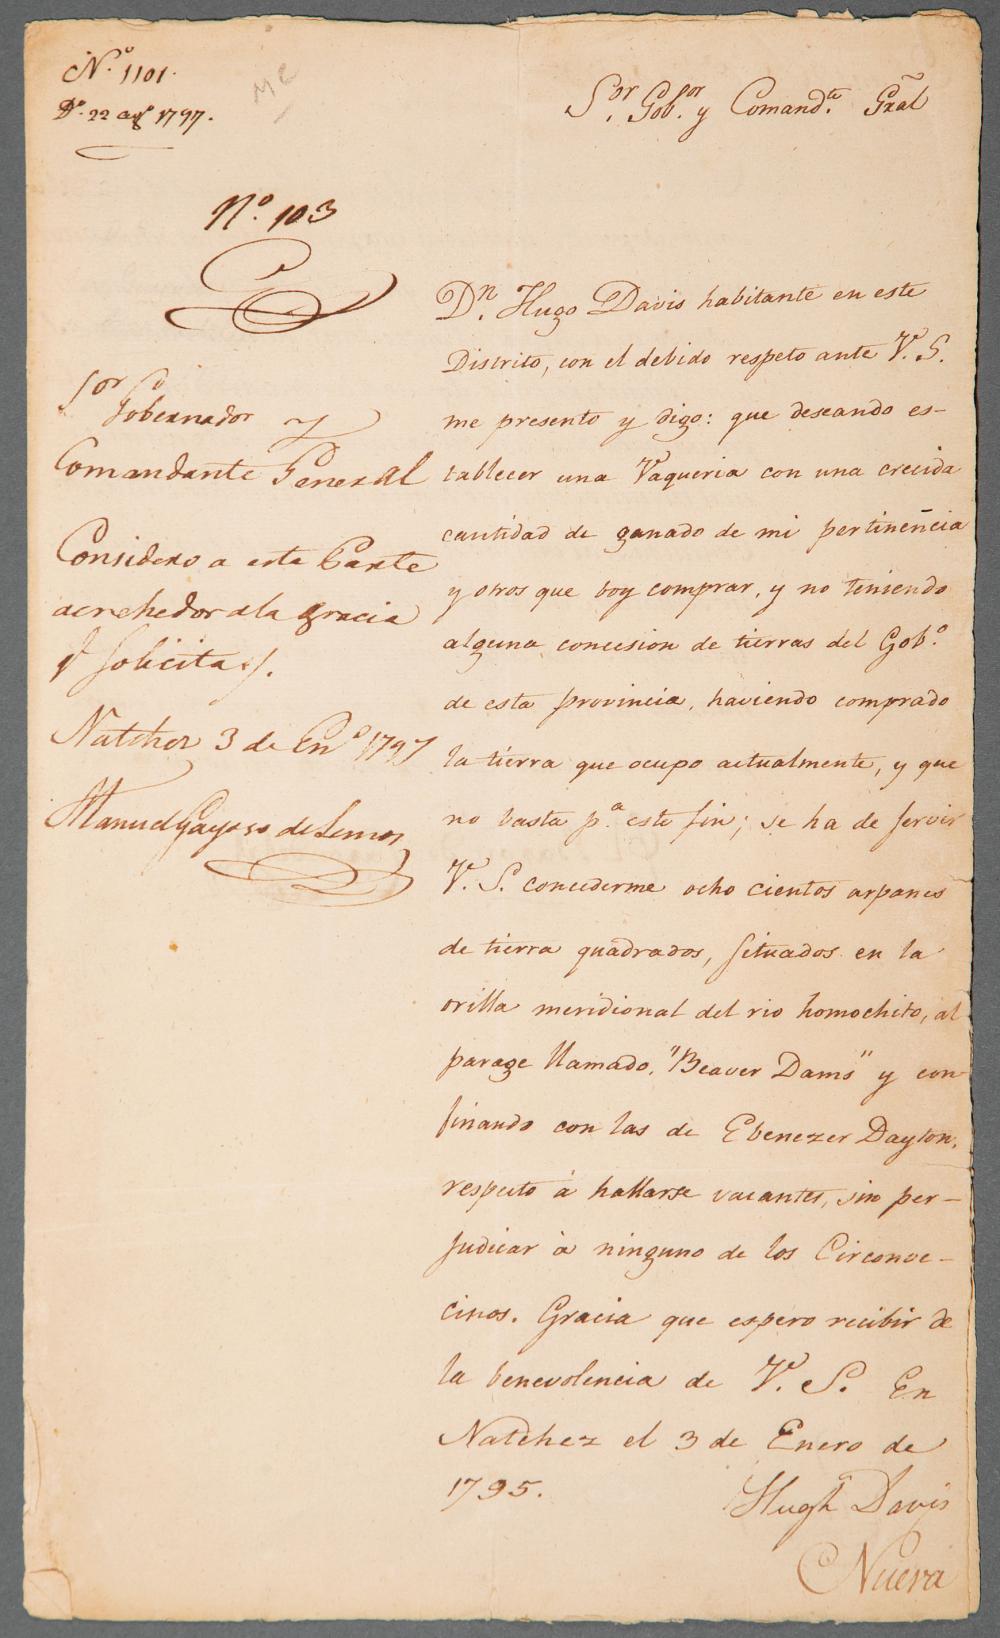 LAND GRANT SIGNED BY MANUEL GAYOSO